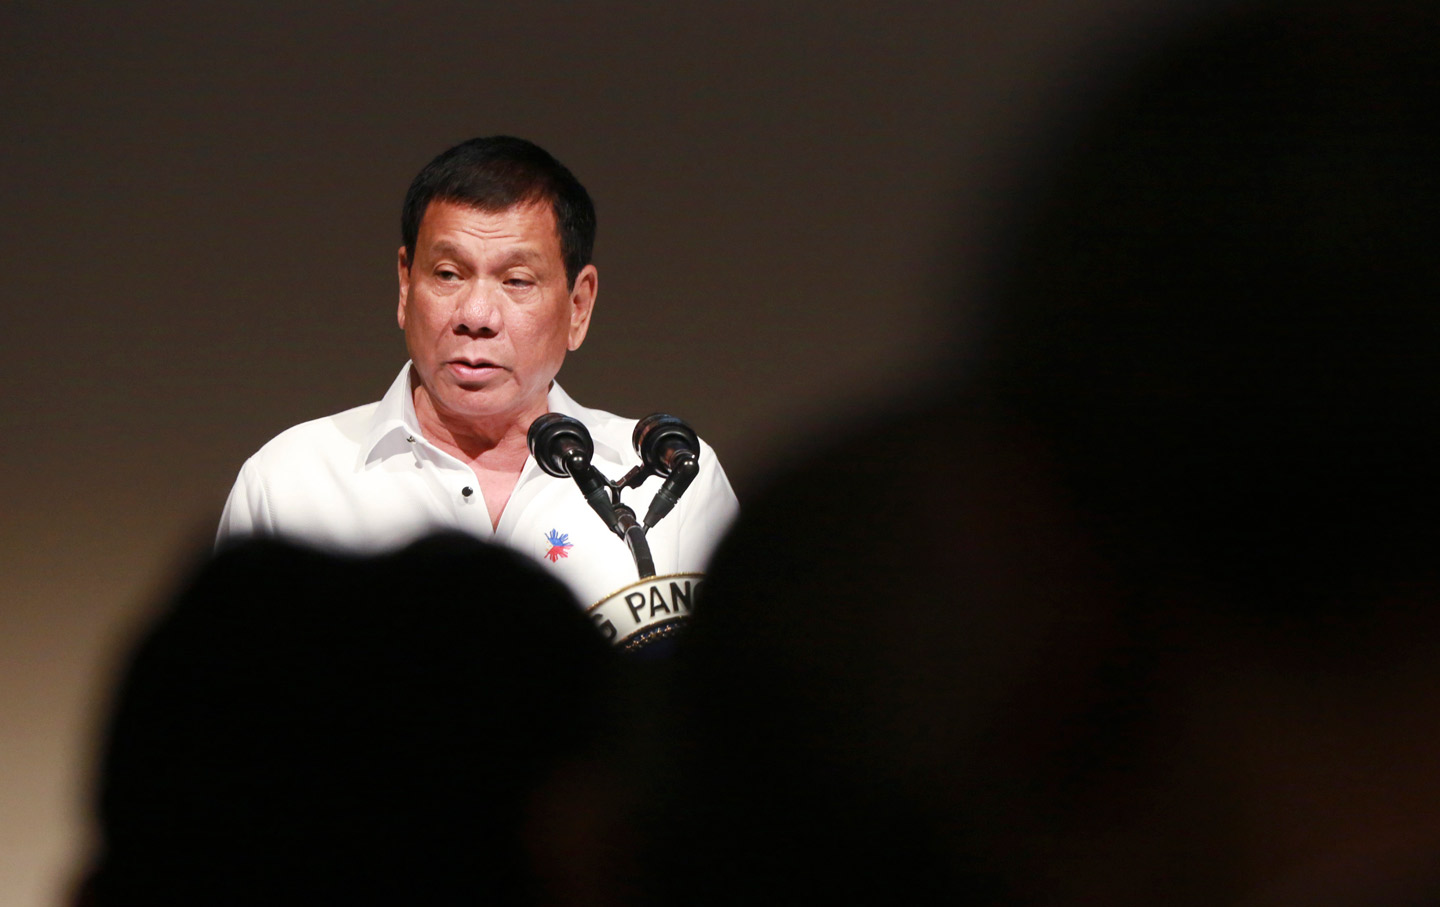 The Philippines’ Drug Crackdown Is Creating an Atmosphere of Impunity for Anti-Union Violence